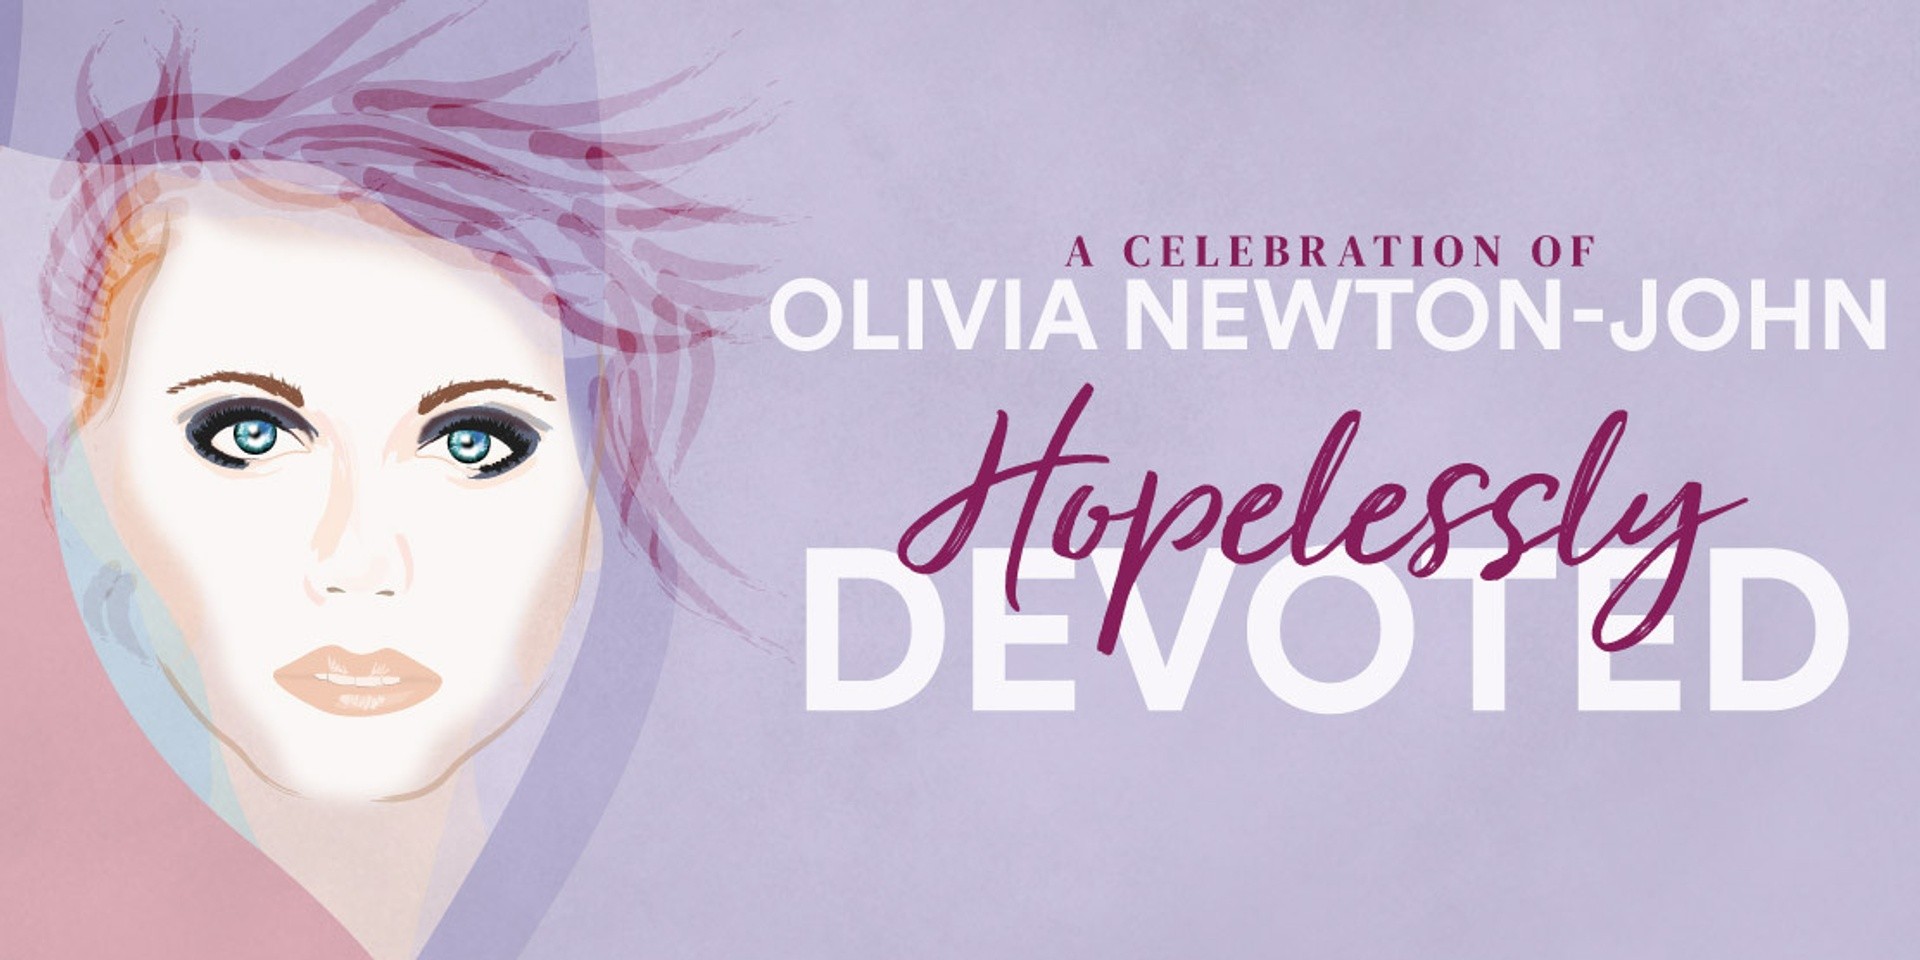 ‘Hopelessly Devoted: A Celebration of Olivia Newton-John’ is coming to Singapore this October